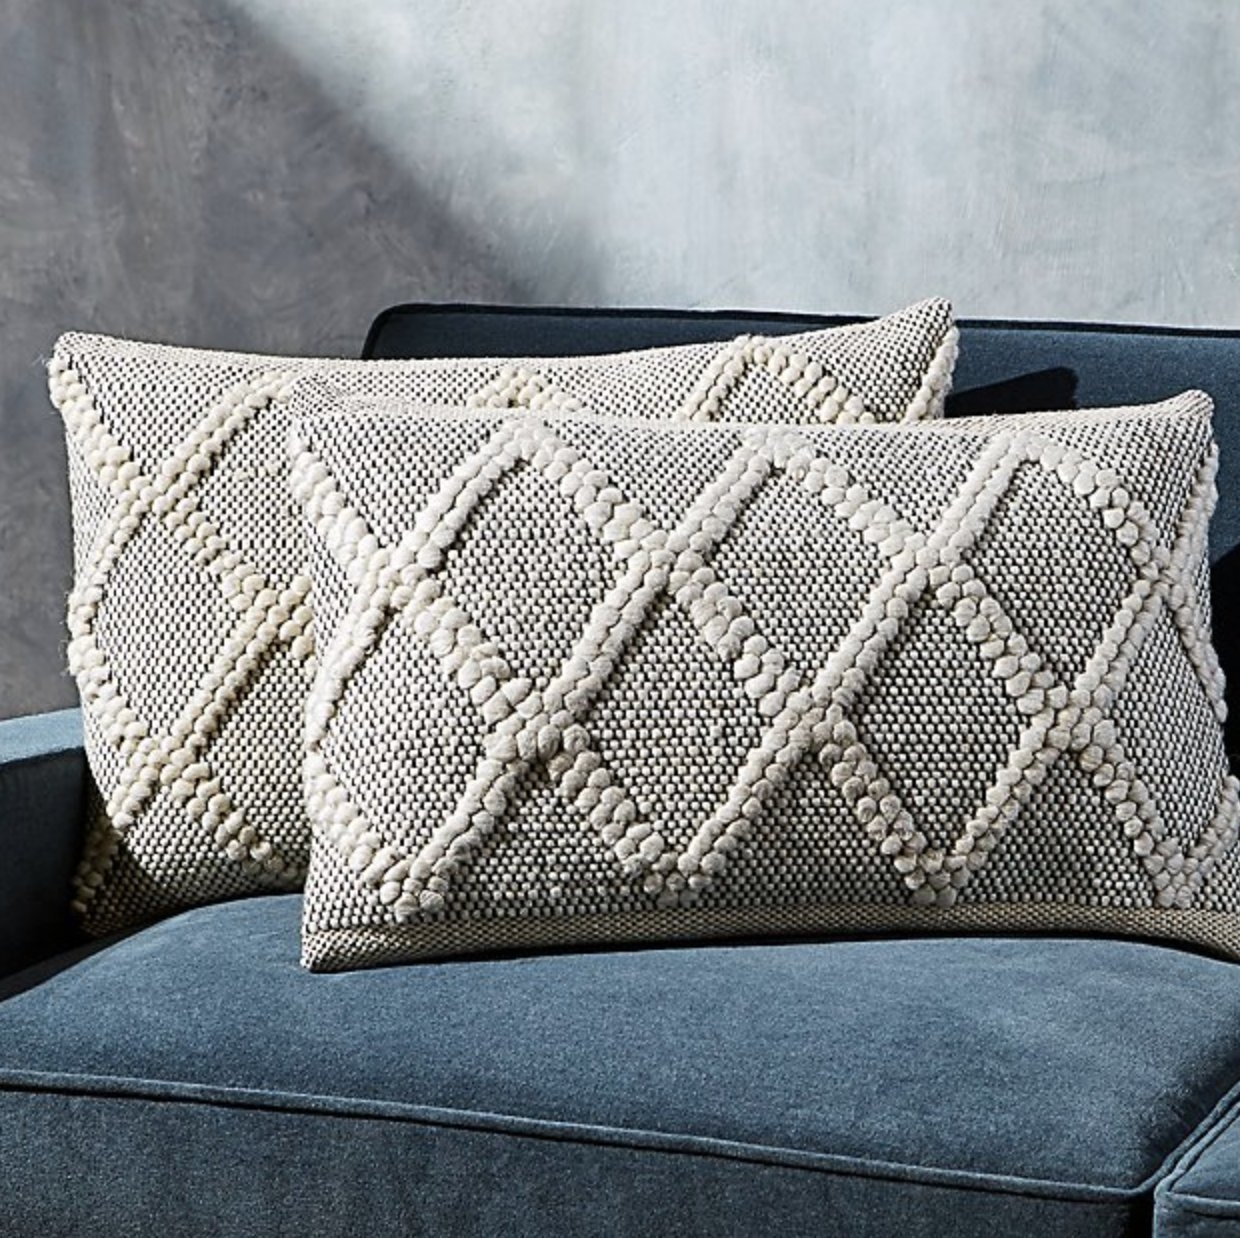 Austine Grey and Cream Pillows 24"x16", Set of 2 - Image 3